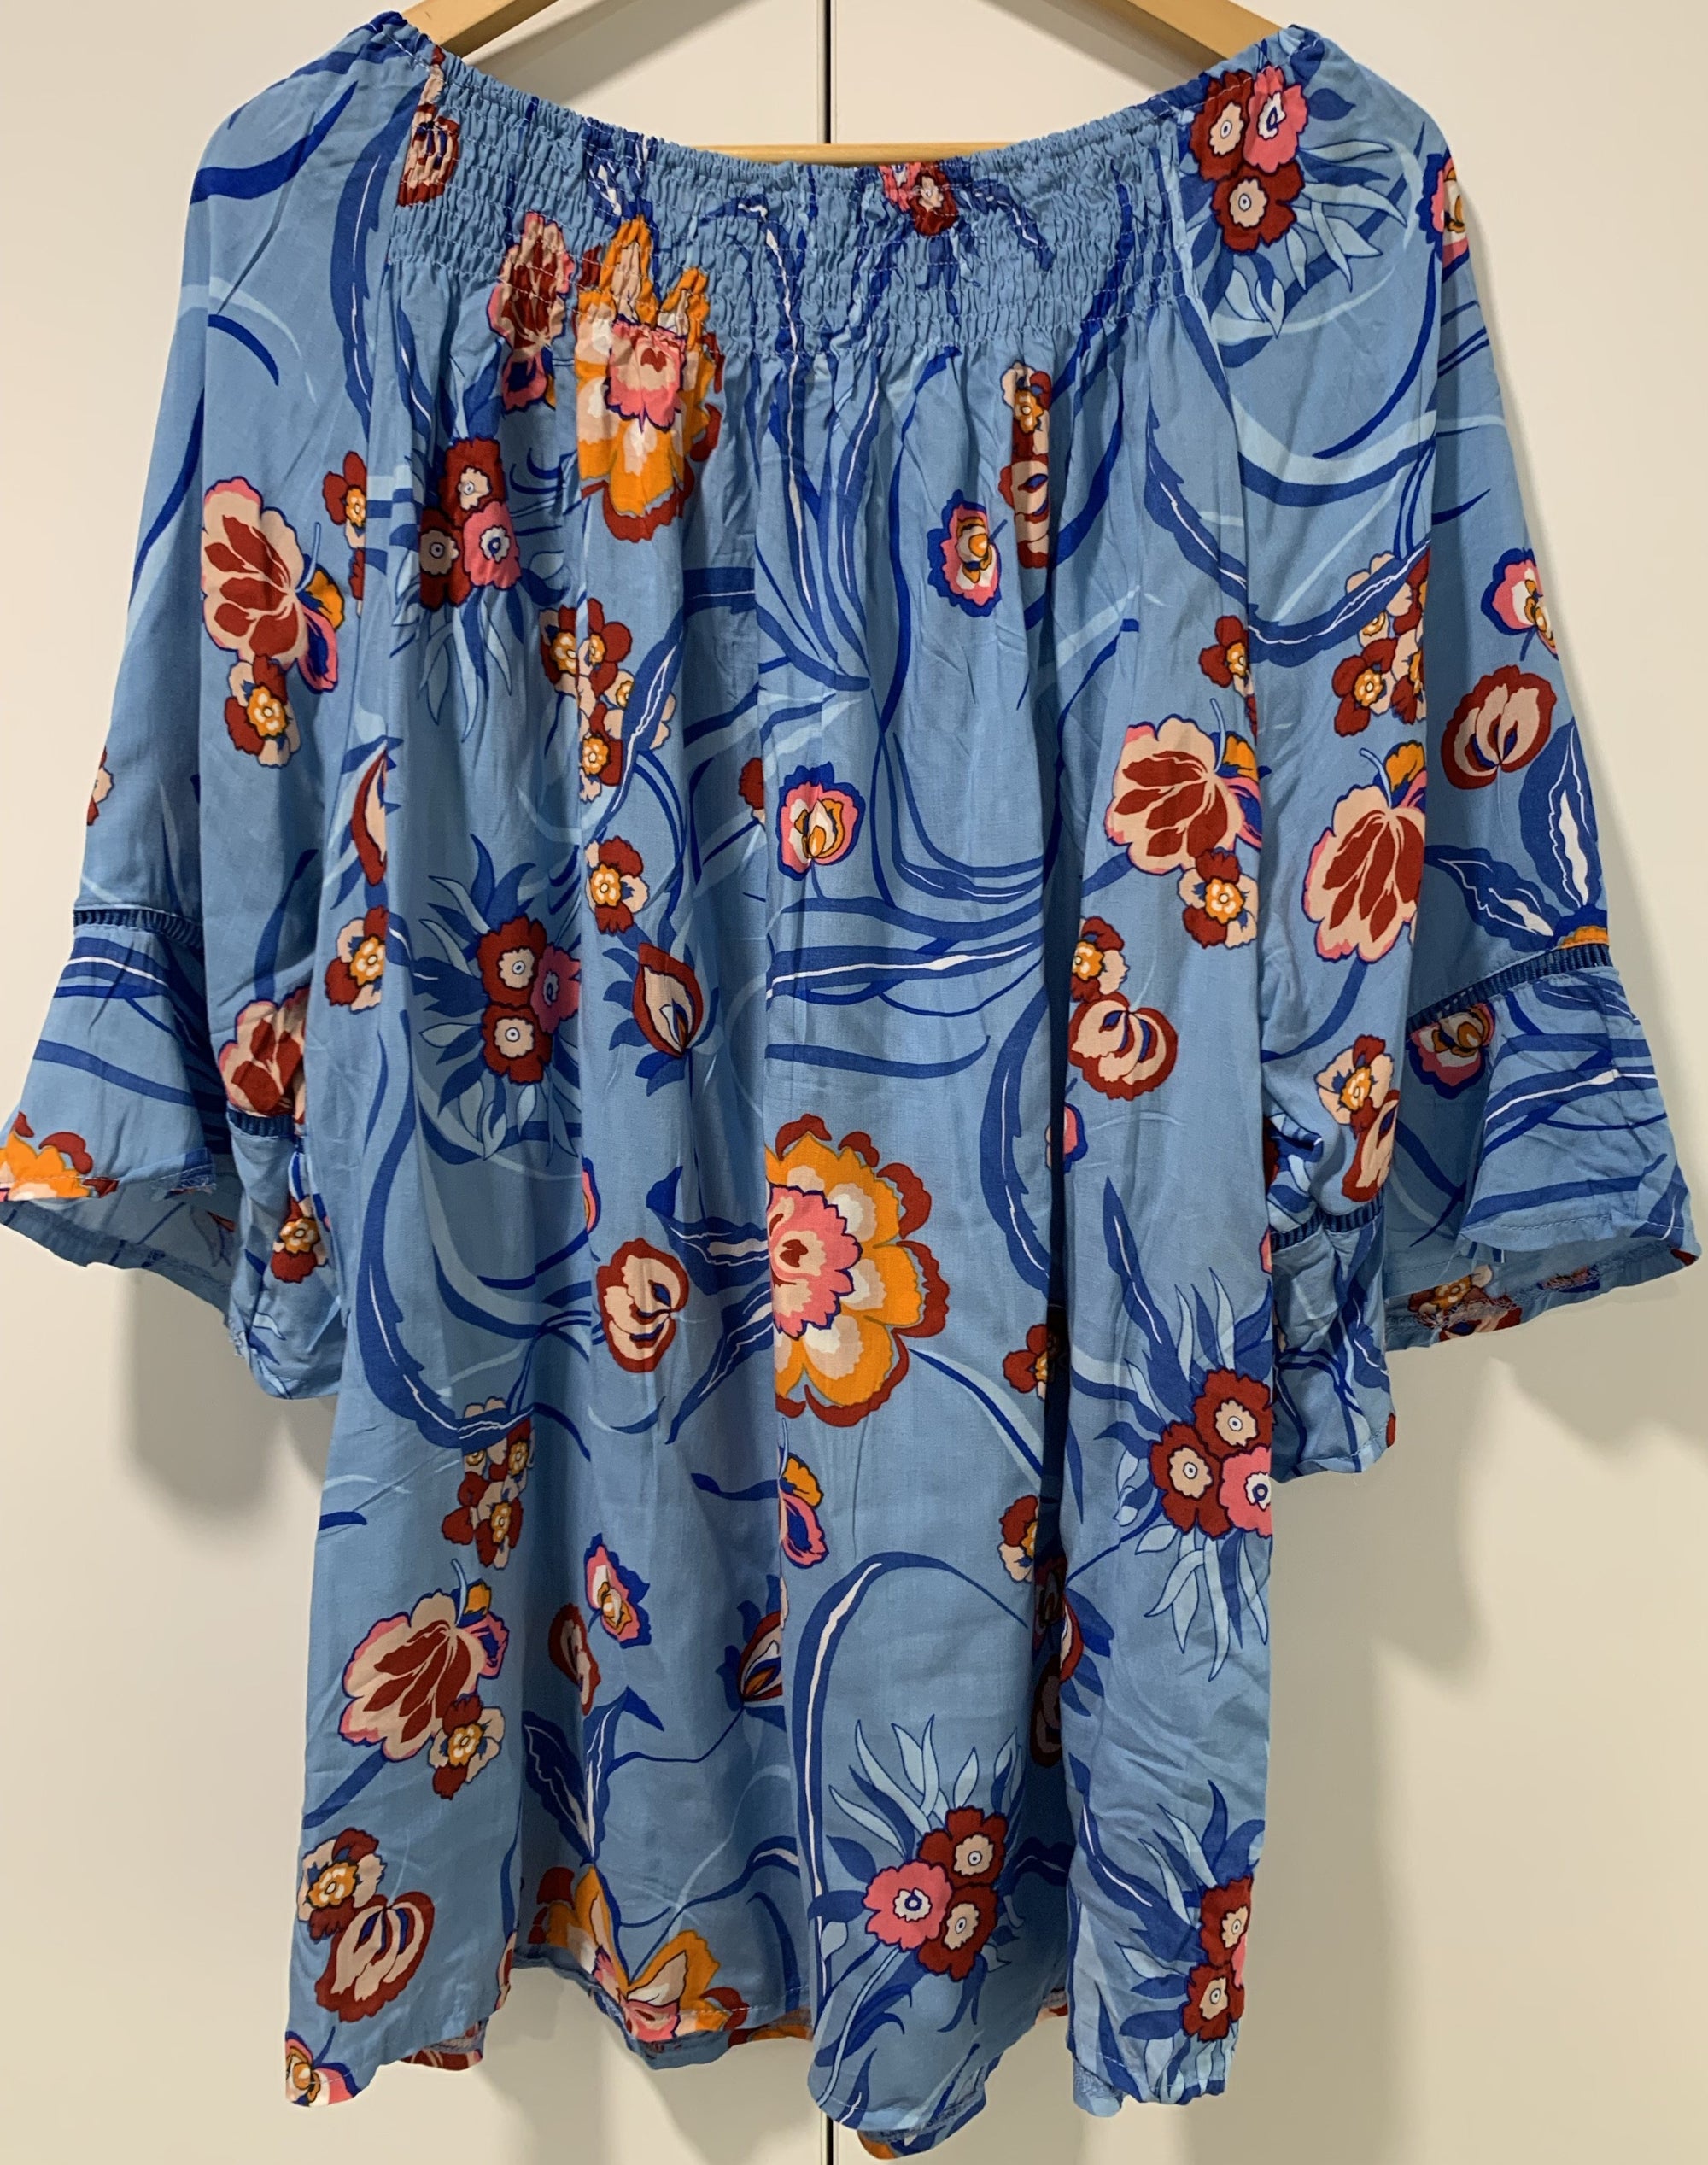 Off the Shoulder Top in Light Blue with Orange Floral Print 3/4 Long Sleeves - Willow Tree